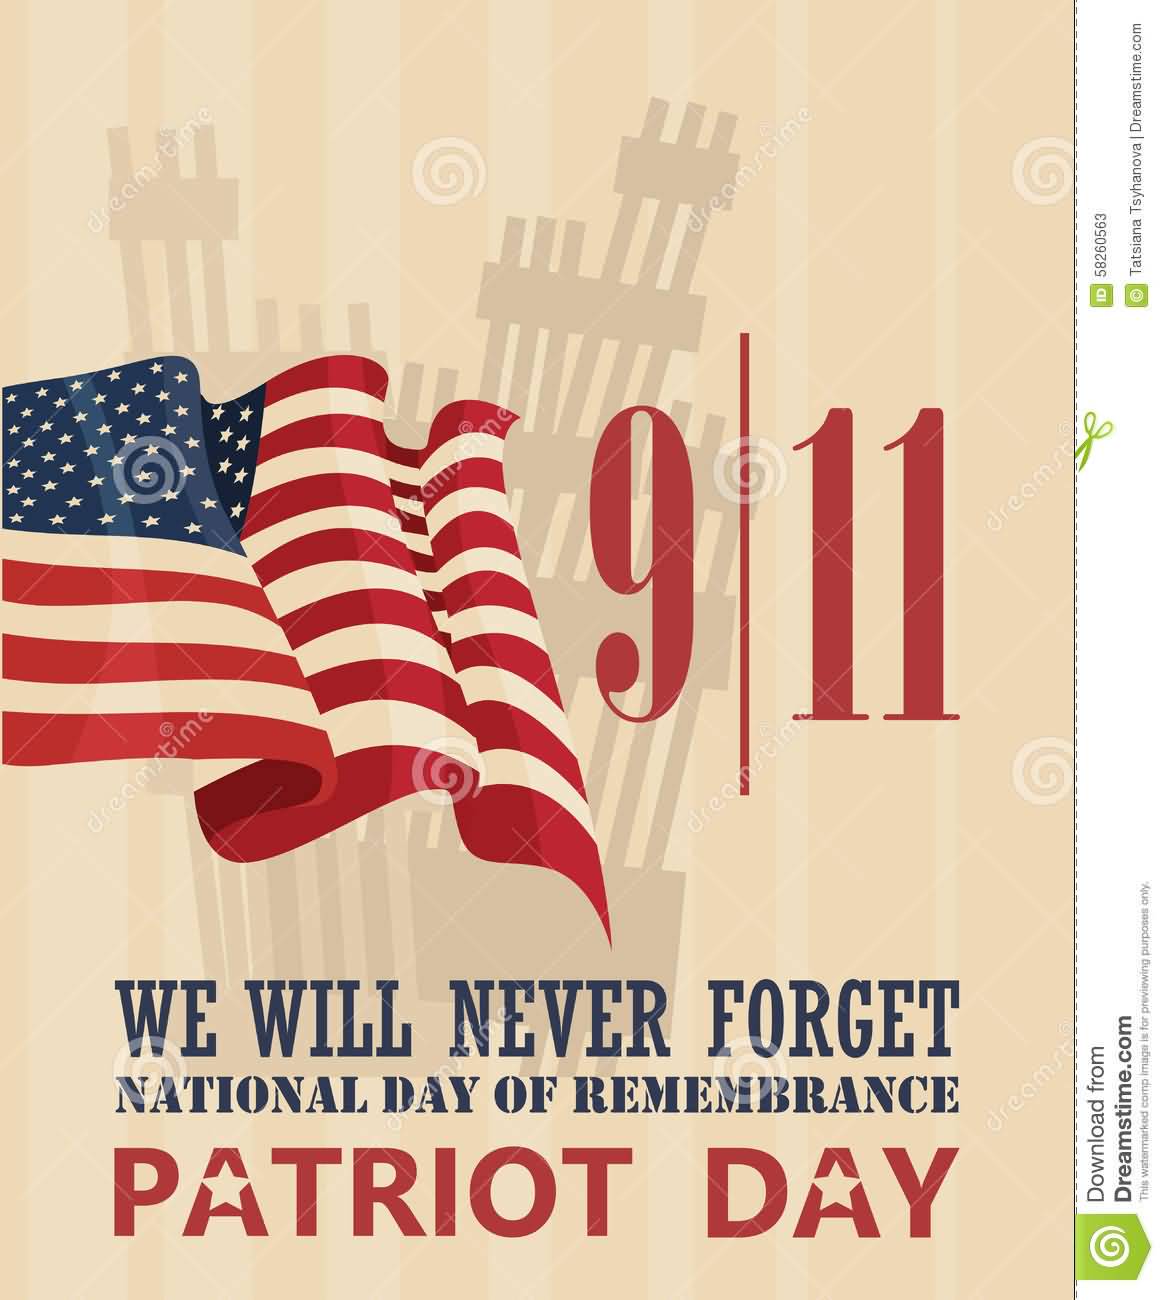 9-11 We Will Never Forget National Day Of Remembrance Patriot Day American Waving Flag Illustration